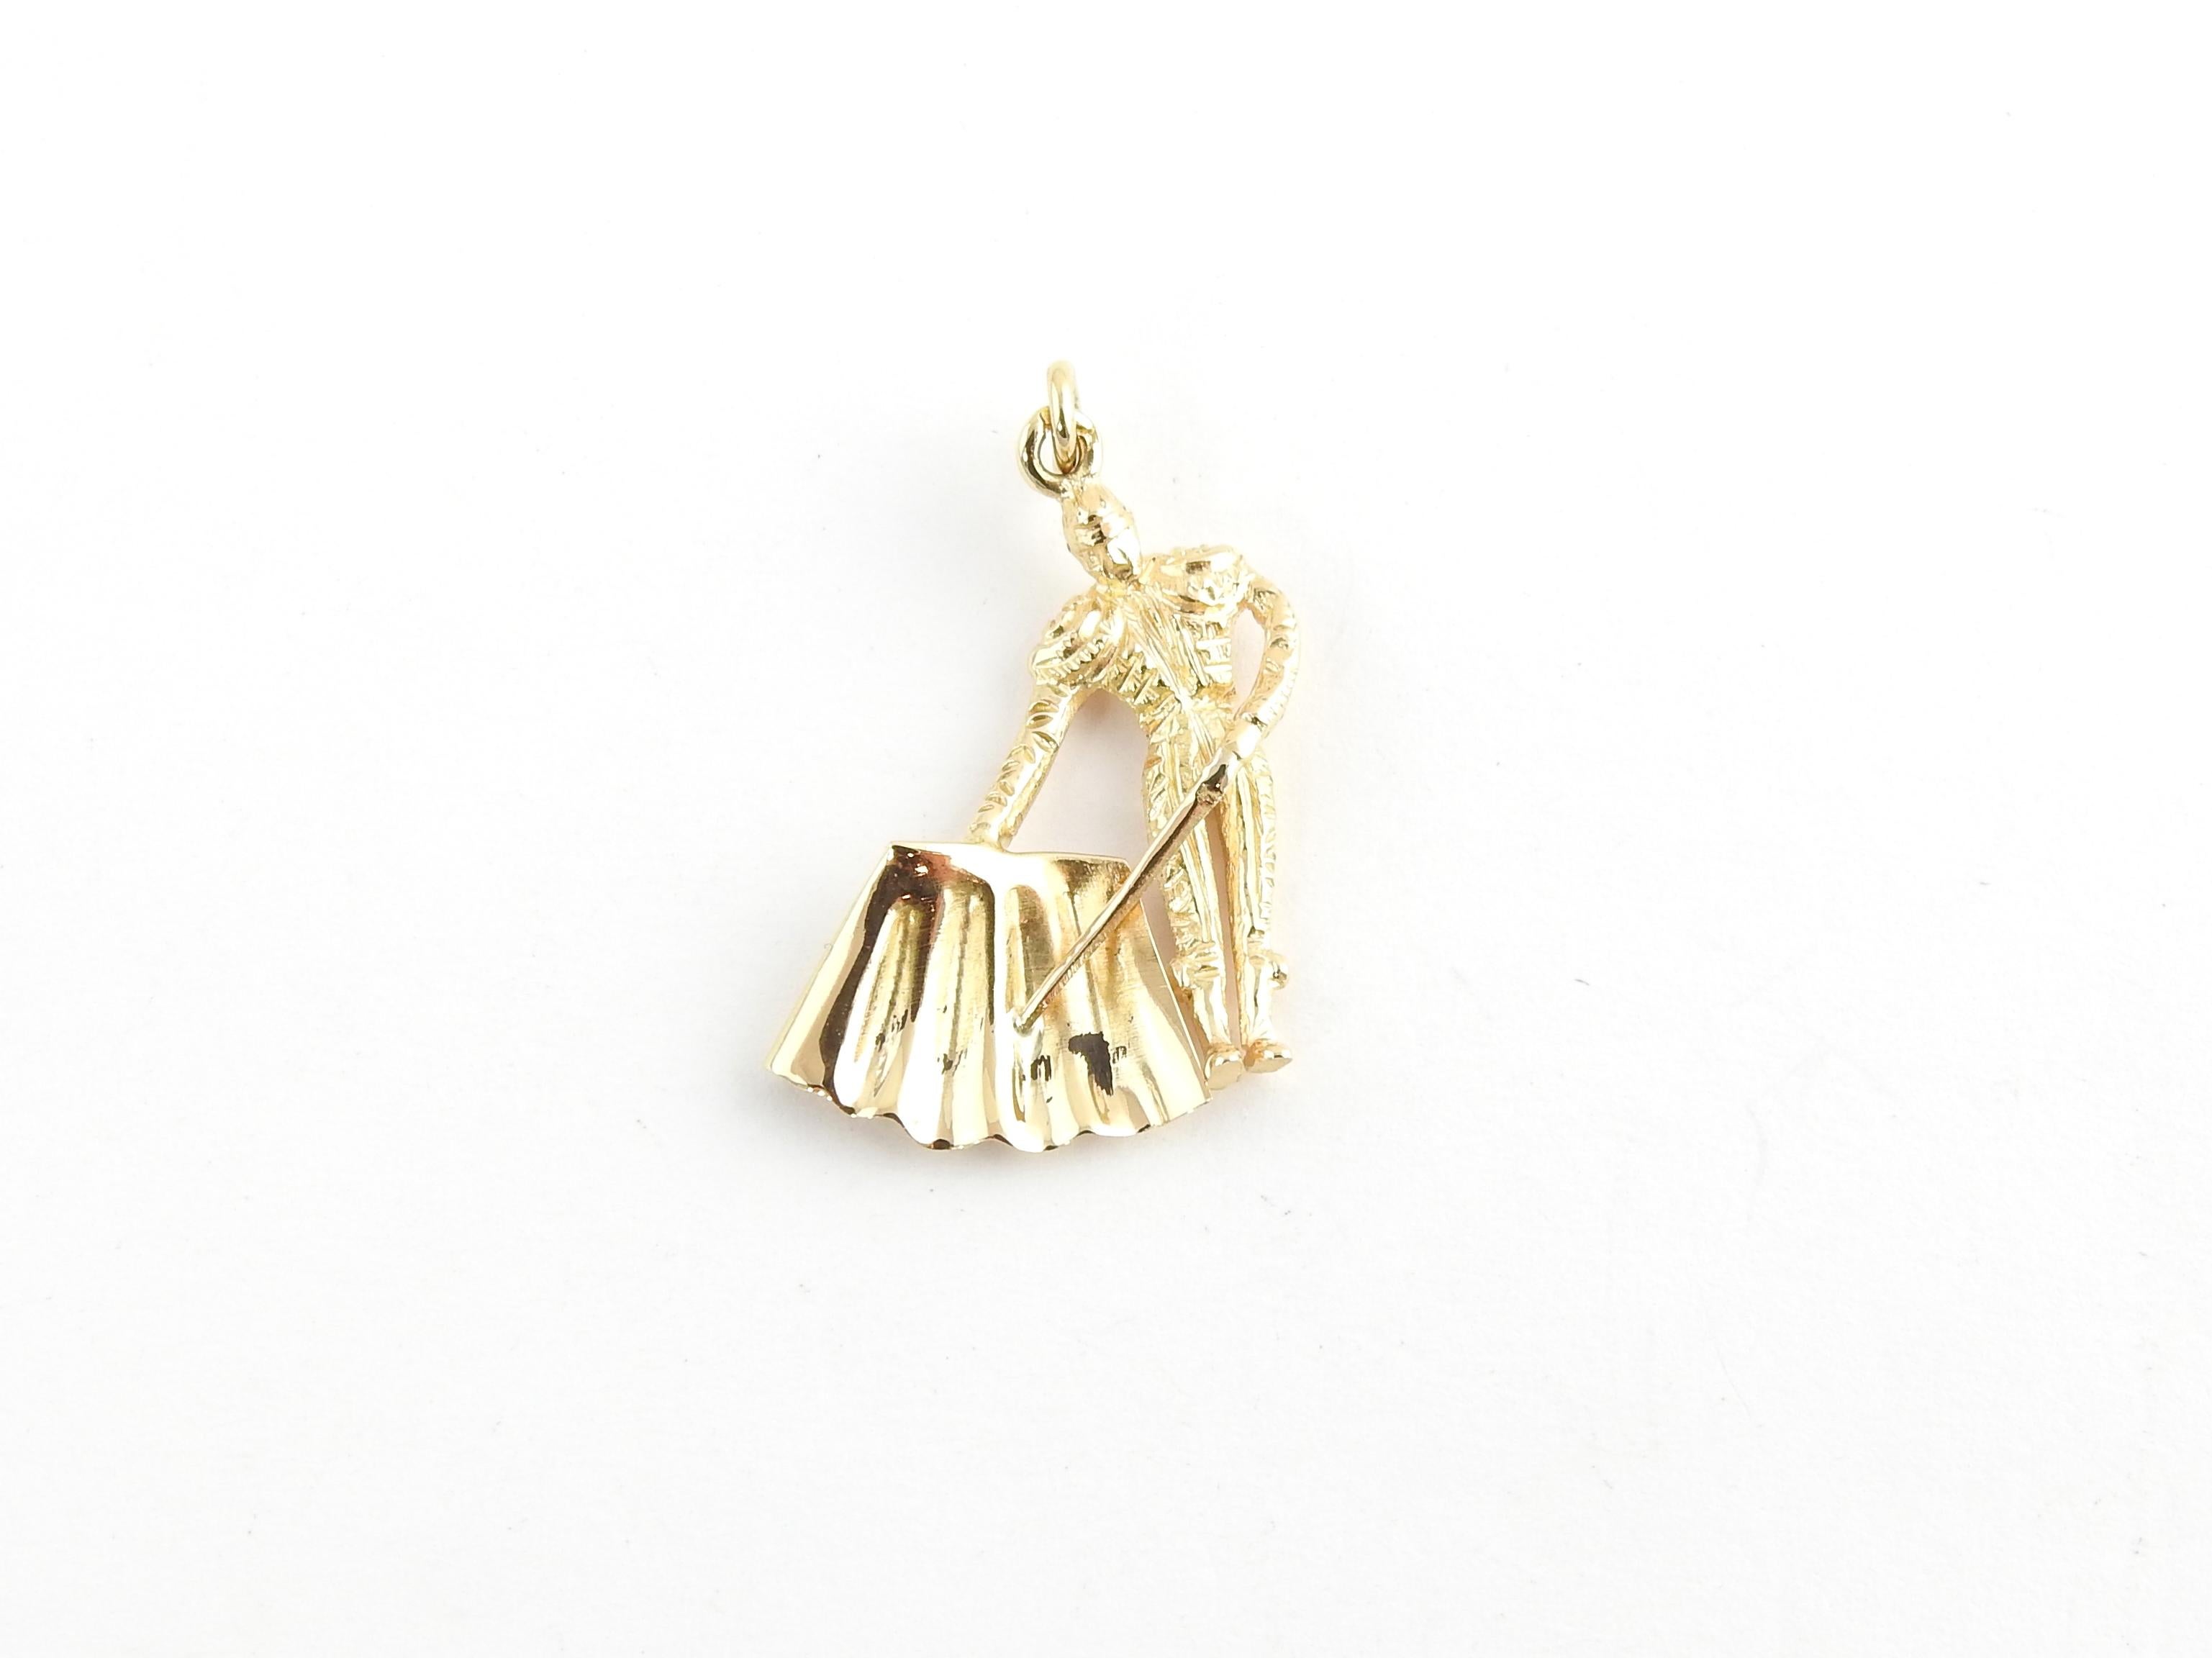 Vintage 14 Karat Yellow Gold Matador Charm

Toro!

This lovely 3D charm features a miniature bullfighter beautifully detailed in 14K yellow gold.

Size: 22 mm x 16 mm (actual charm)

Weight: 1.4 dwt. / 2.2 gr.

Acid tested for 14K gold.

Very good